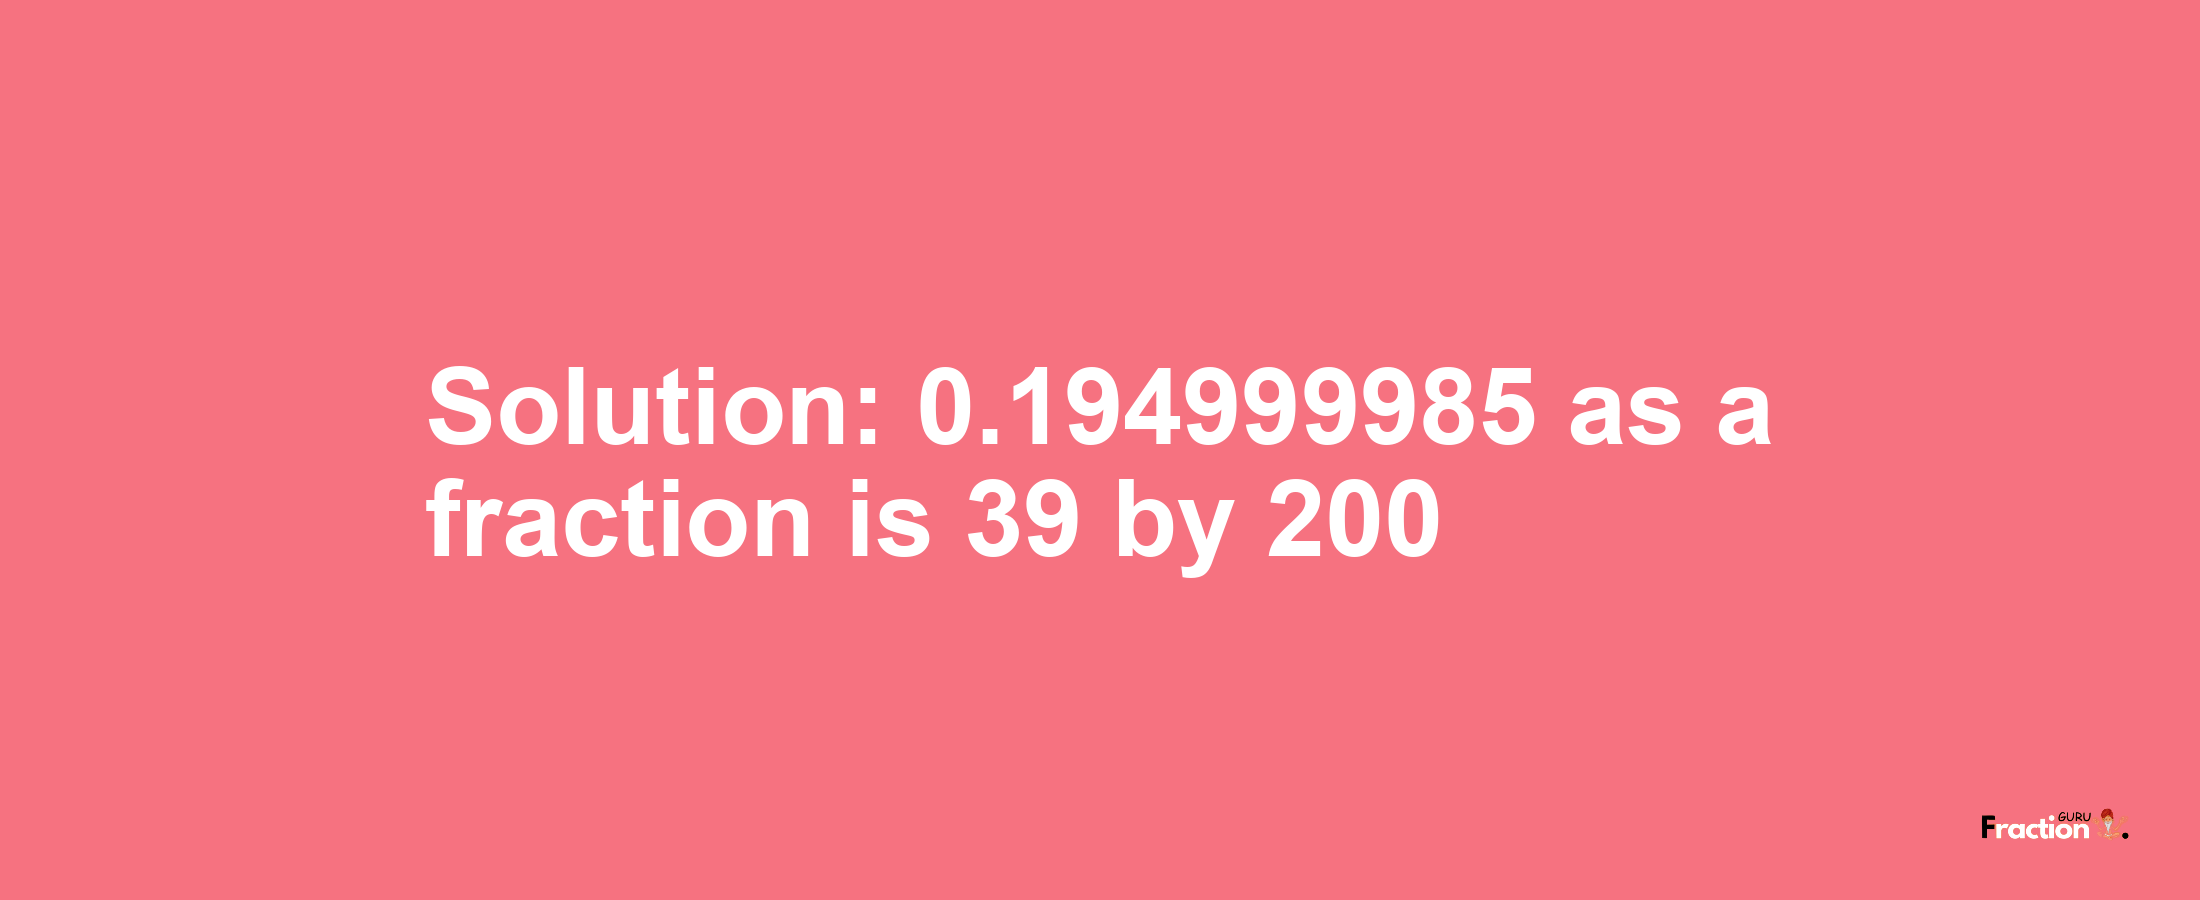 Solution:0.194999985 as a fraction is 39/200